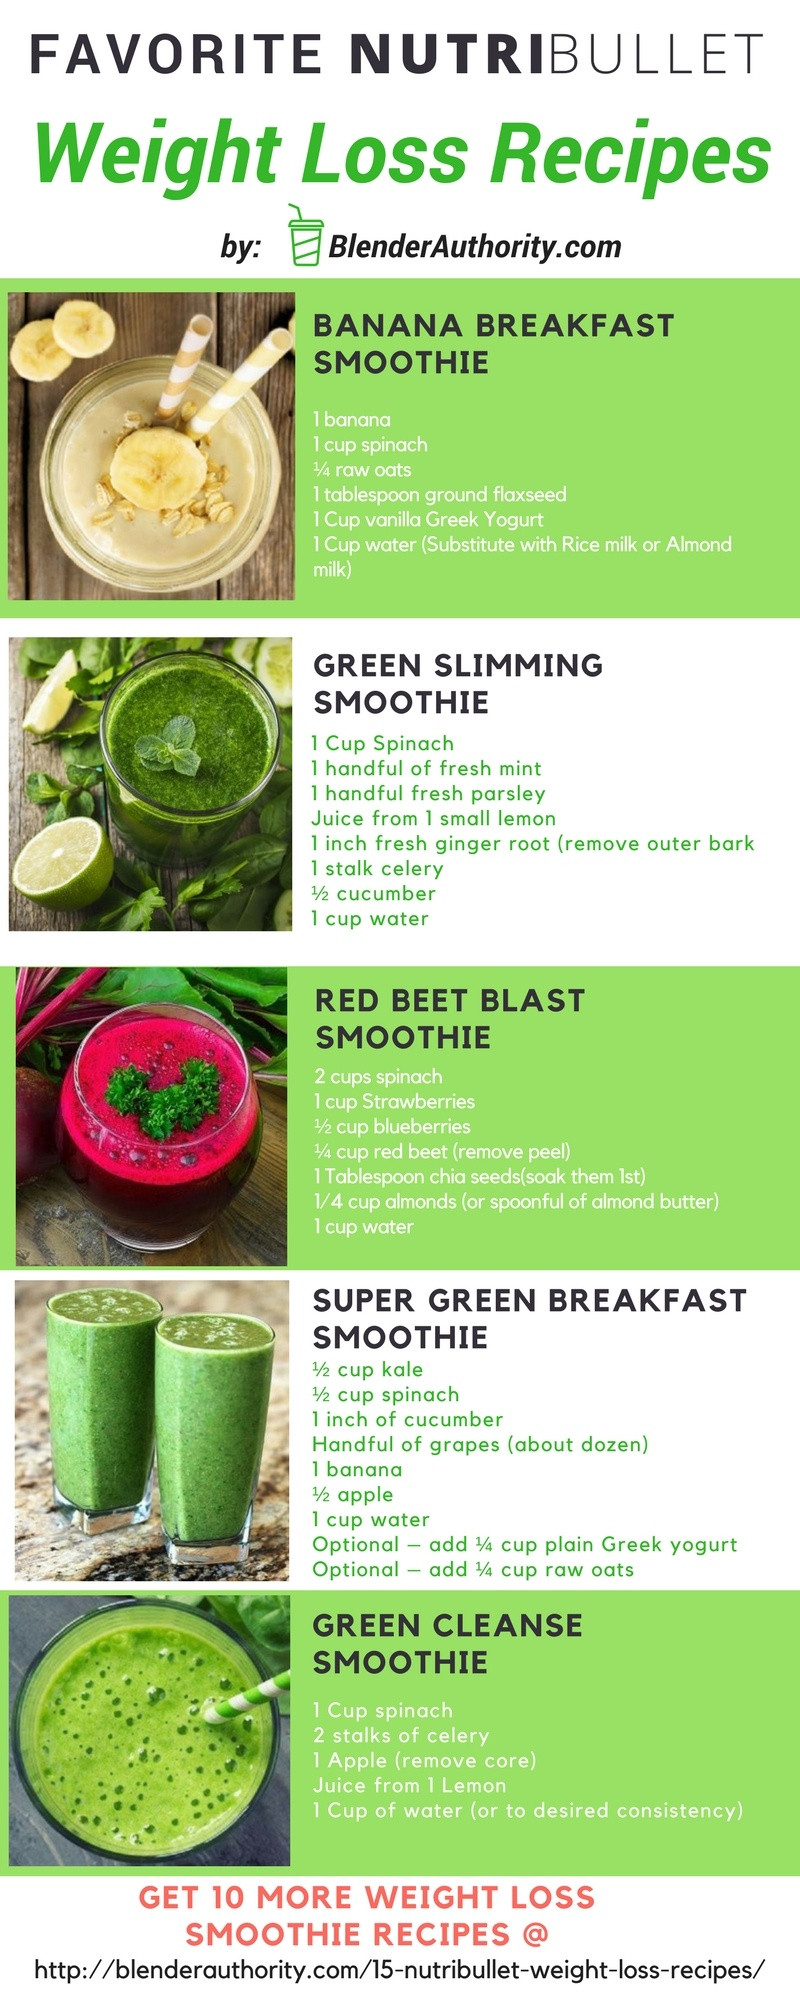 Green Smoothie Recipes For Weight Loss
 Weight Loss Green Smoothie Recipes Uk